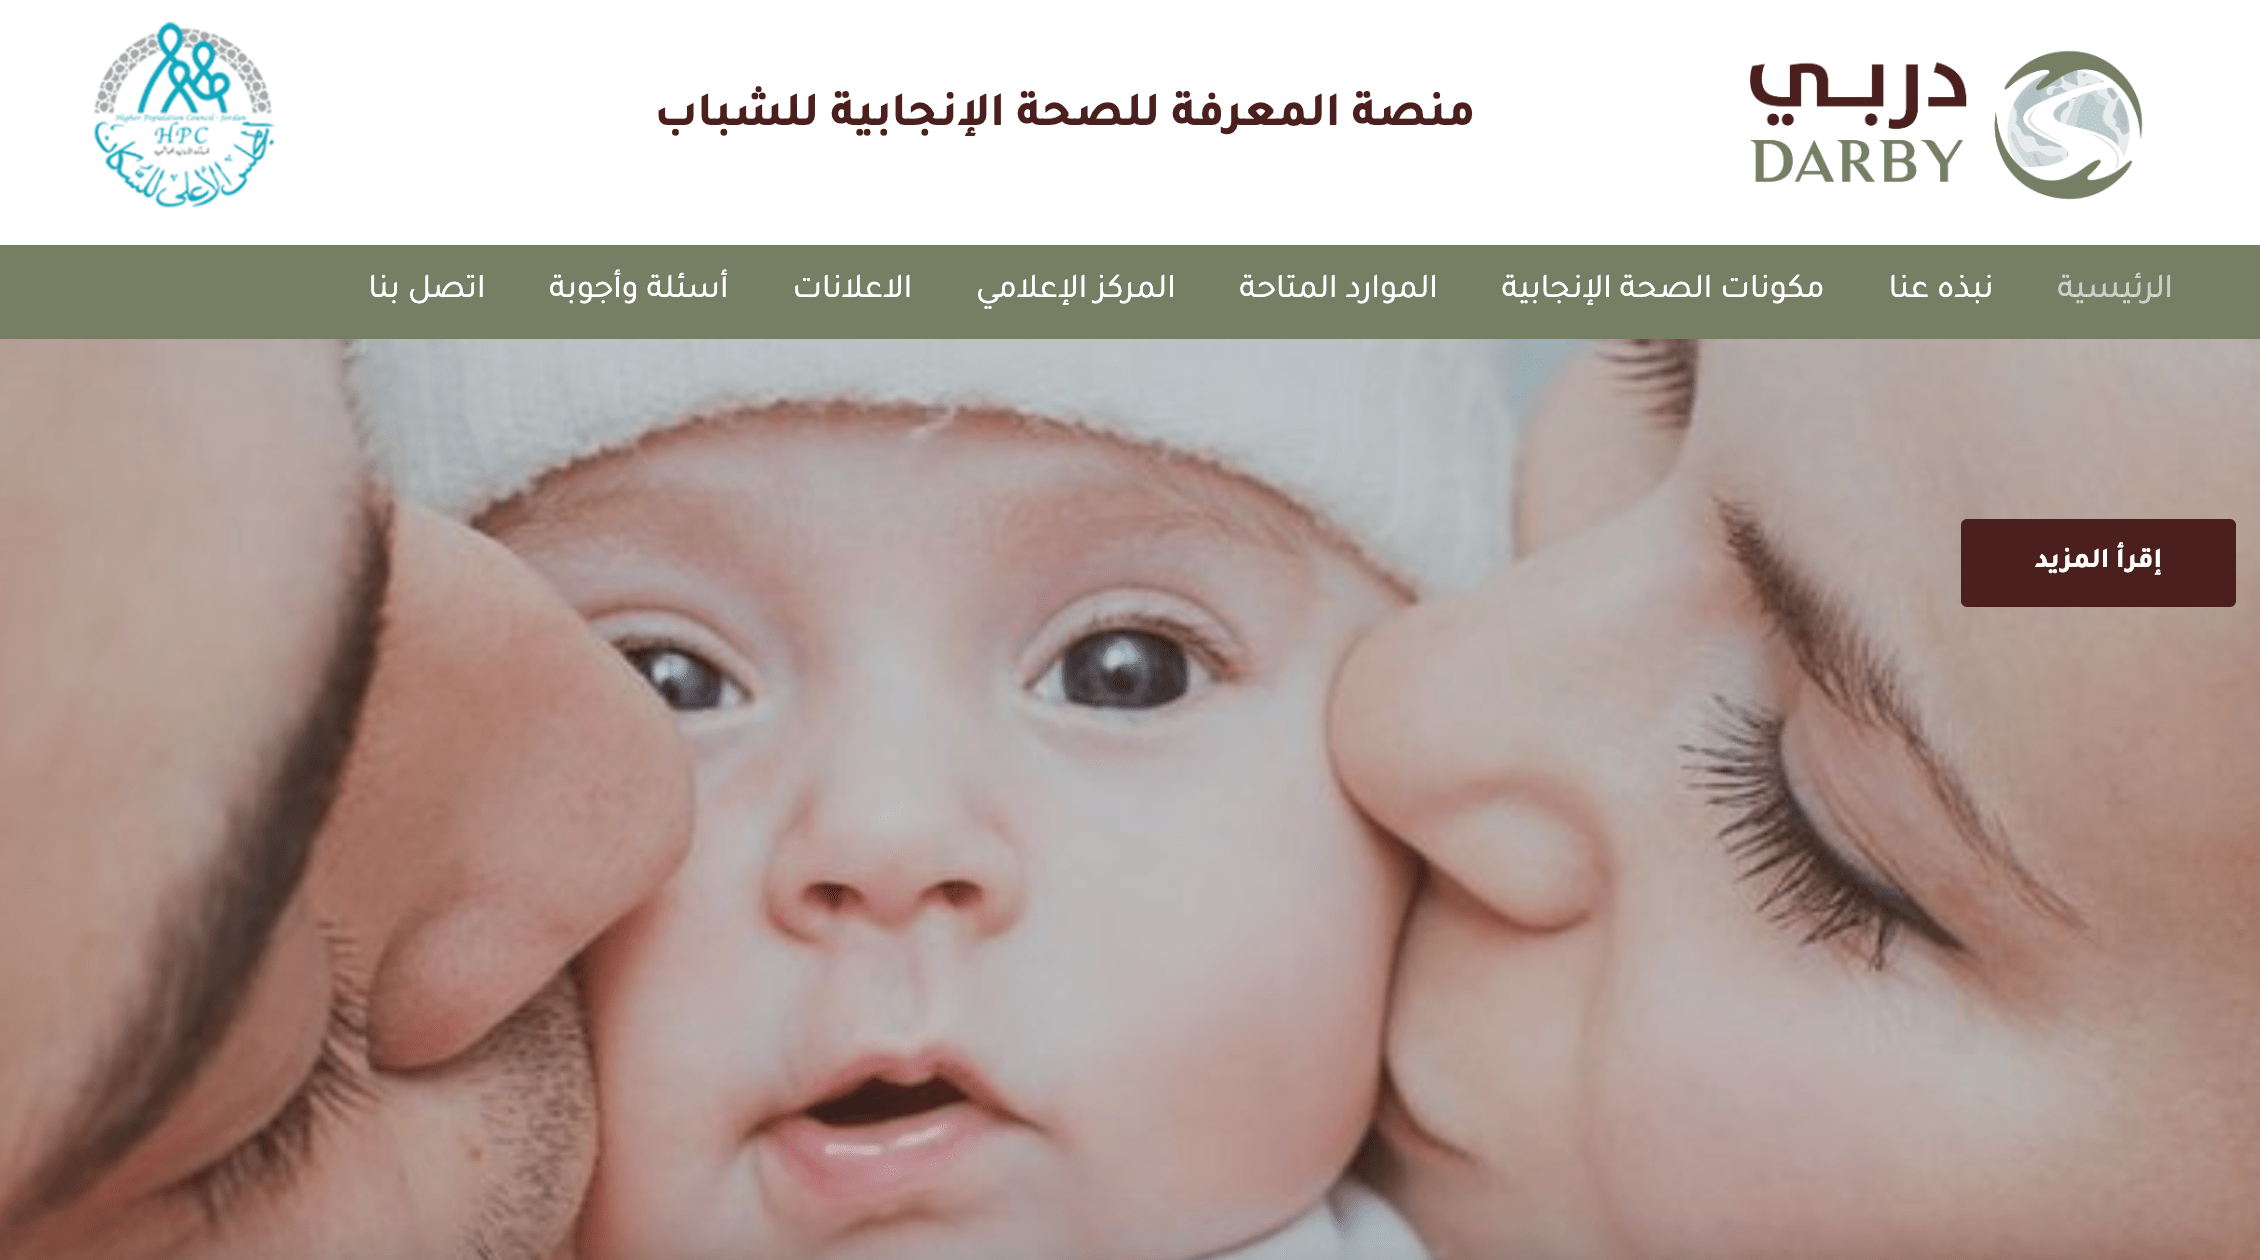 DARBY: Arabic Youth Platform for Sexual and Reproductive Health Launched in Jordan